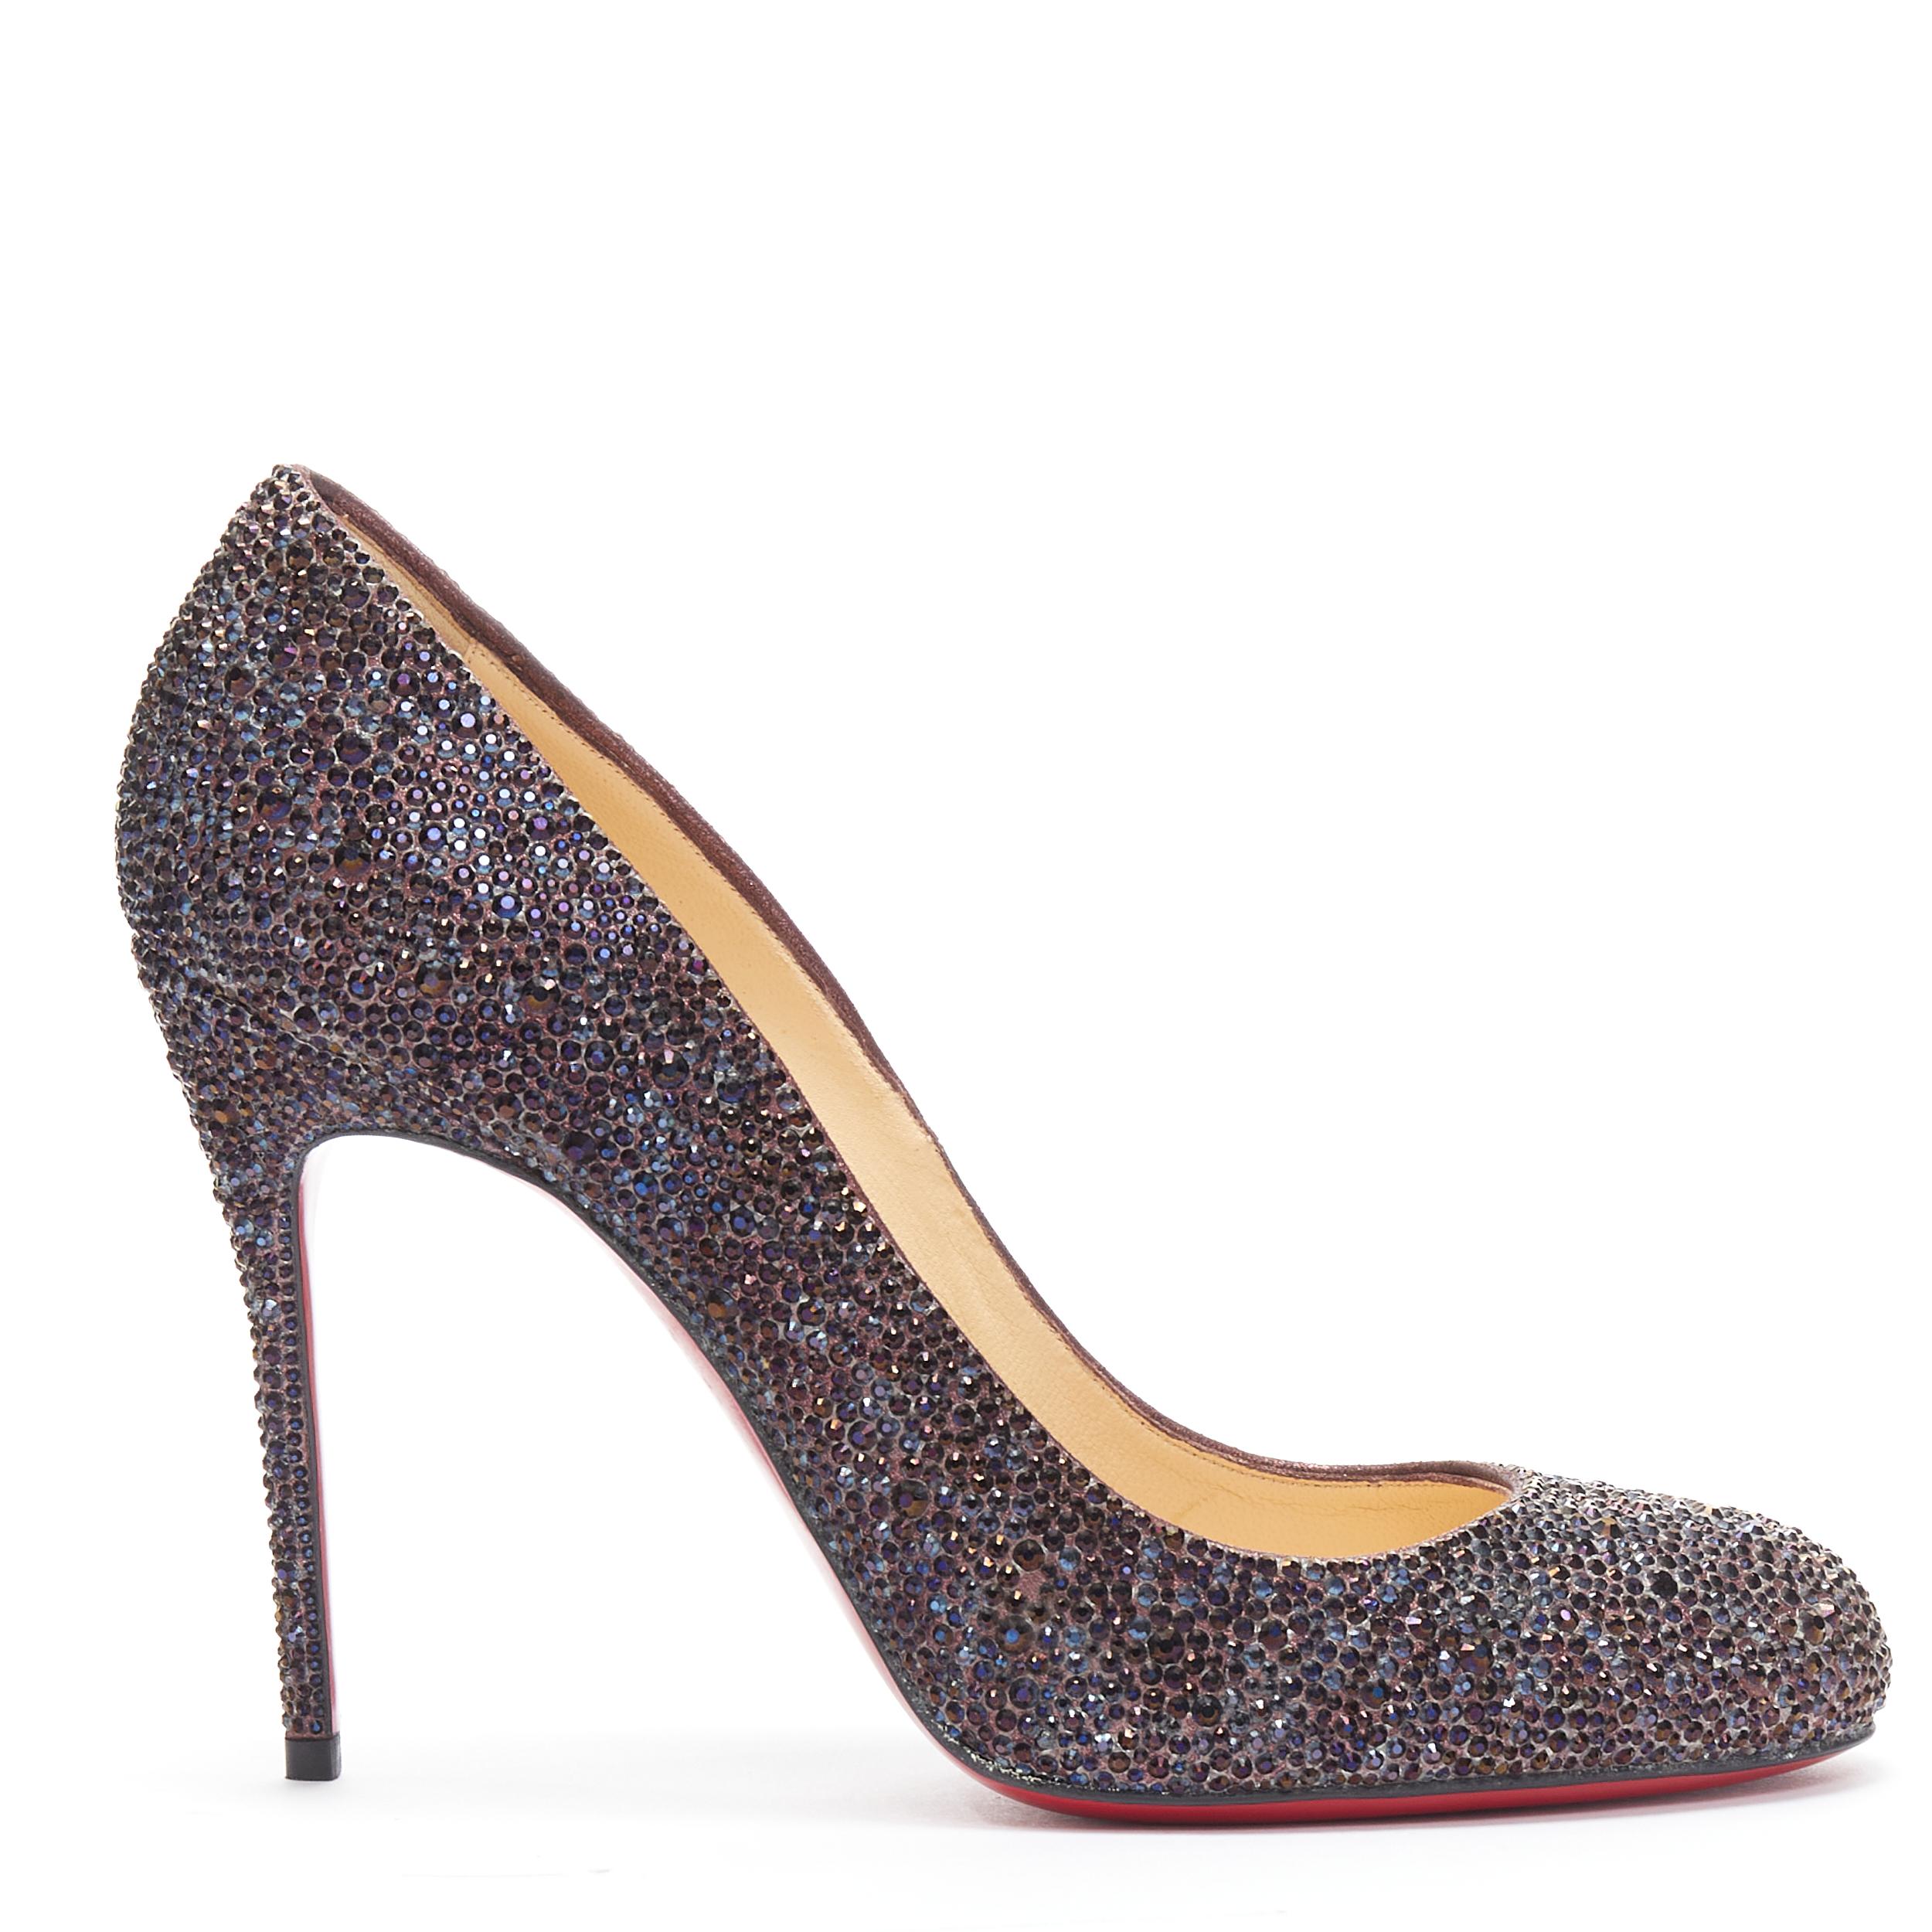 new CHRISTIAN LOUBOUTIN Fifi 110 purple strass crystal high heel pump EU39.5 
Reference: TGAS/B01274 
Brand: Christian Louboutin 
Designer: Christian Louboutin 
Model: Fifi strass 110 
Material: Leather 
Color: Purple 
Pattern: Solid 
Extra Detail: